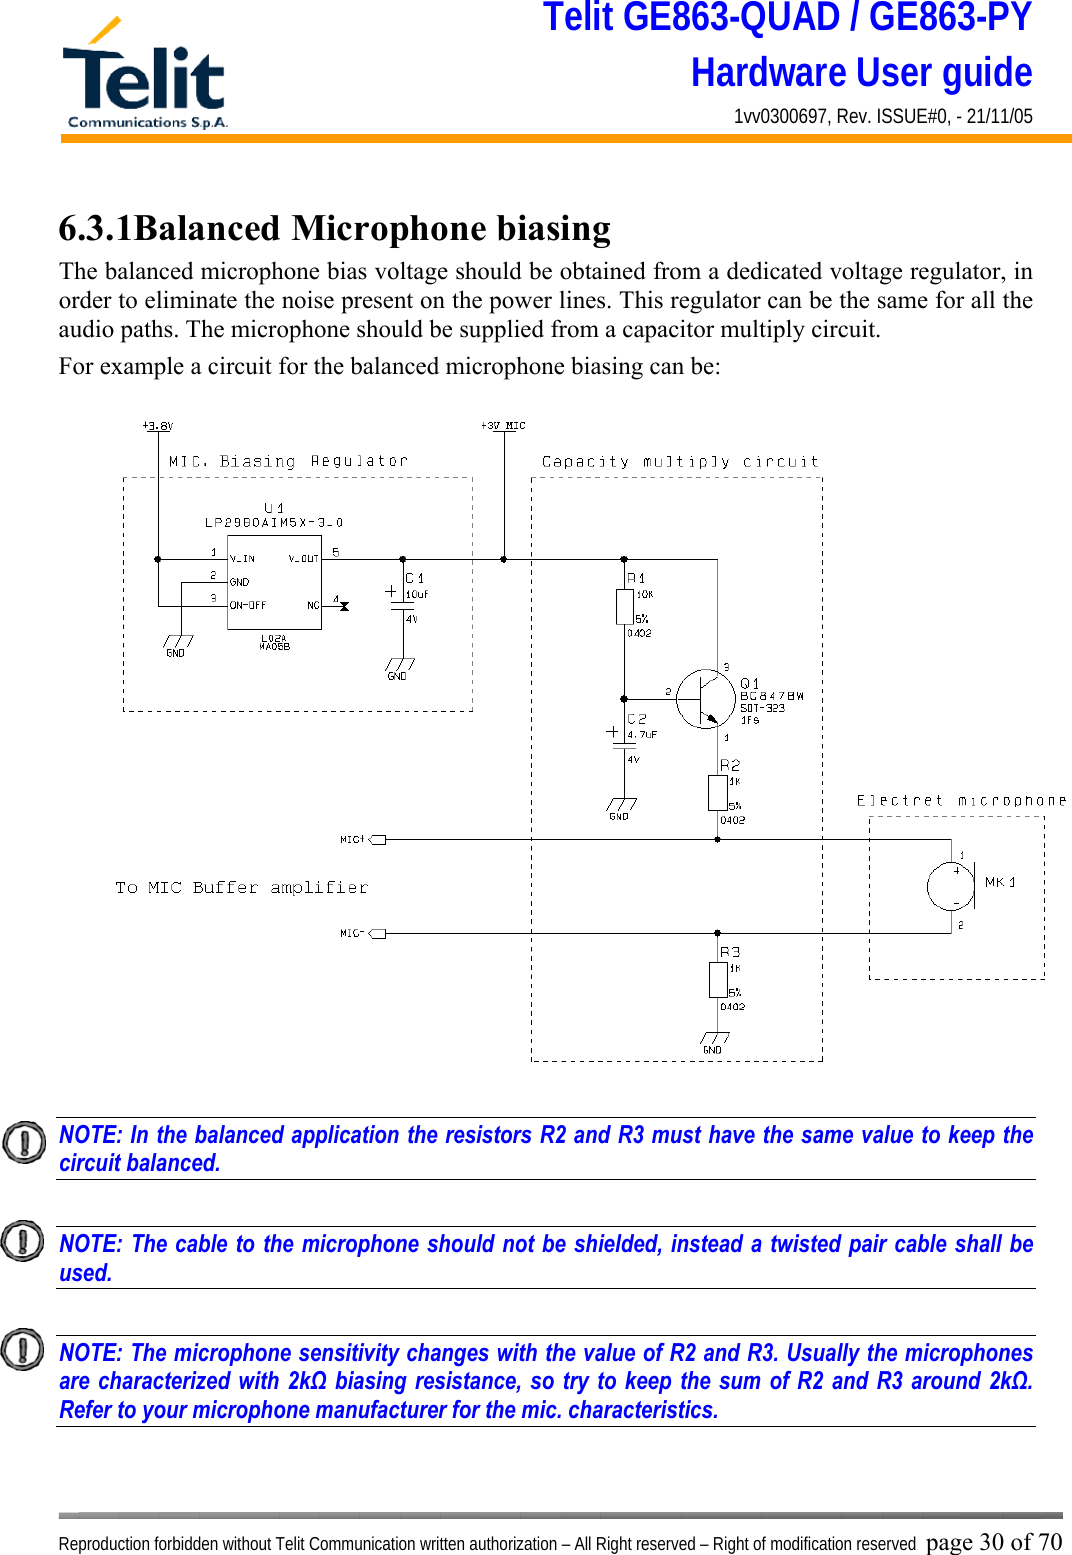 Telit GE863-QUAD / GE863-PY Hardware User guide 1vv0300697, Rev. ISSUE#0, - 21/11/05    Reproduction forbidden without Telit Communication written authorization – All Right reserved – Right of modification reserved page 30 of 70 6.3.1Balanced Microphone biasing The balanced microphone bias voltage should be obtained from a dedicated voltage regulator, in order to eliminate the noise present on the power lines. This regulator can be the same for all the audio paths. The microphone should be supplied from a capacitor multiply circuit. For example a circuit for the balanced microphone biasing can be:  NOTE: In the balanced application the resistors R2 and R3 must have the same value to keep the circuit balanced.    NOTE: The cable to the microphone should not be shielded, instead a twisted pair cable shall be used.    NOTE: The microphone sensitivity changes with the value of R2 and R3. Usually the microphones are characterized with 2kΩ biasing resistance, so try to keep the sum of R2 and R3 around 2kΩ.  Refer to your microphone manufacturer for the mic. characteristics.  